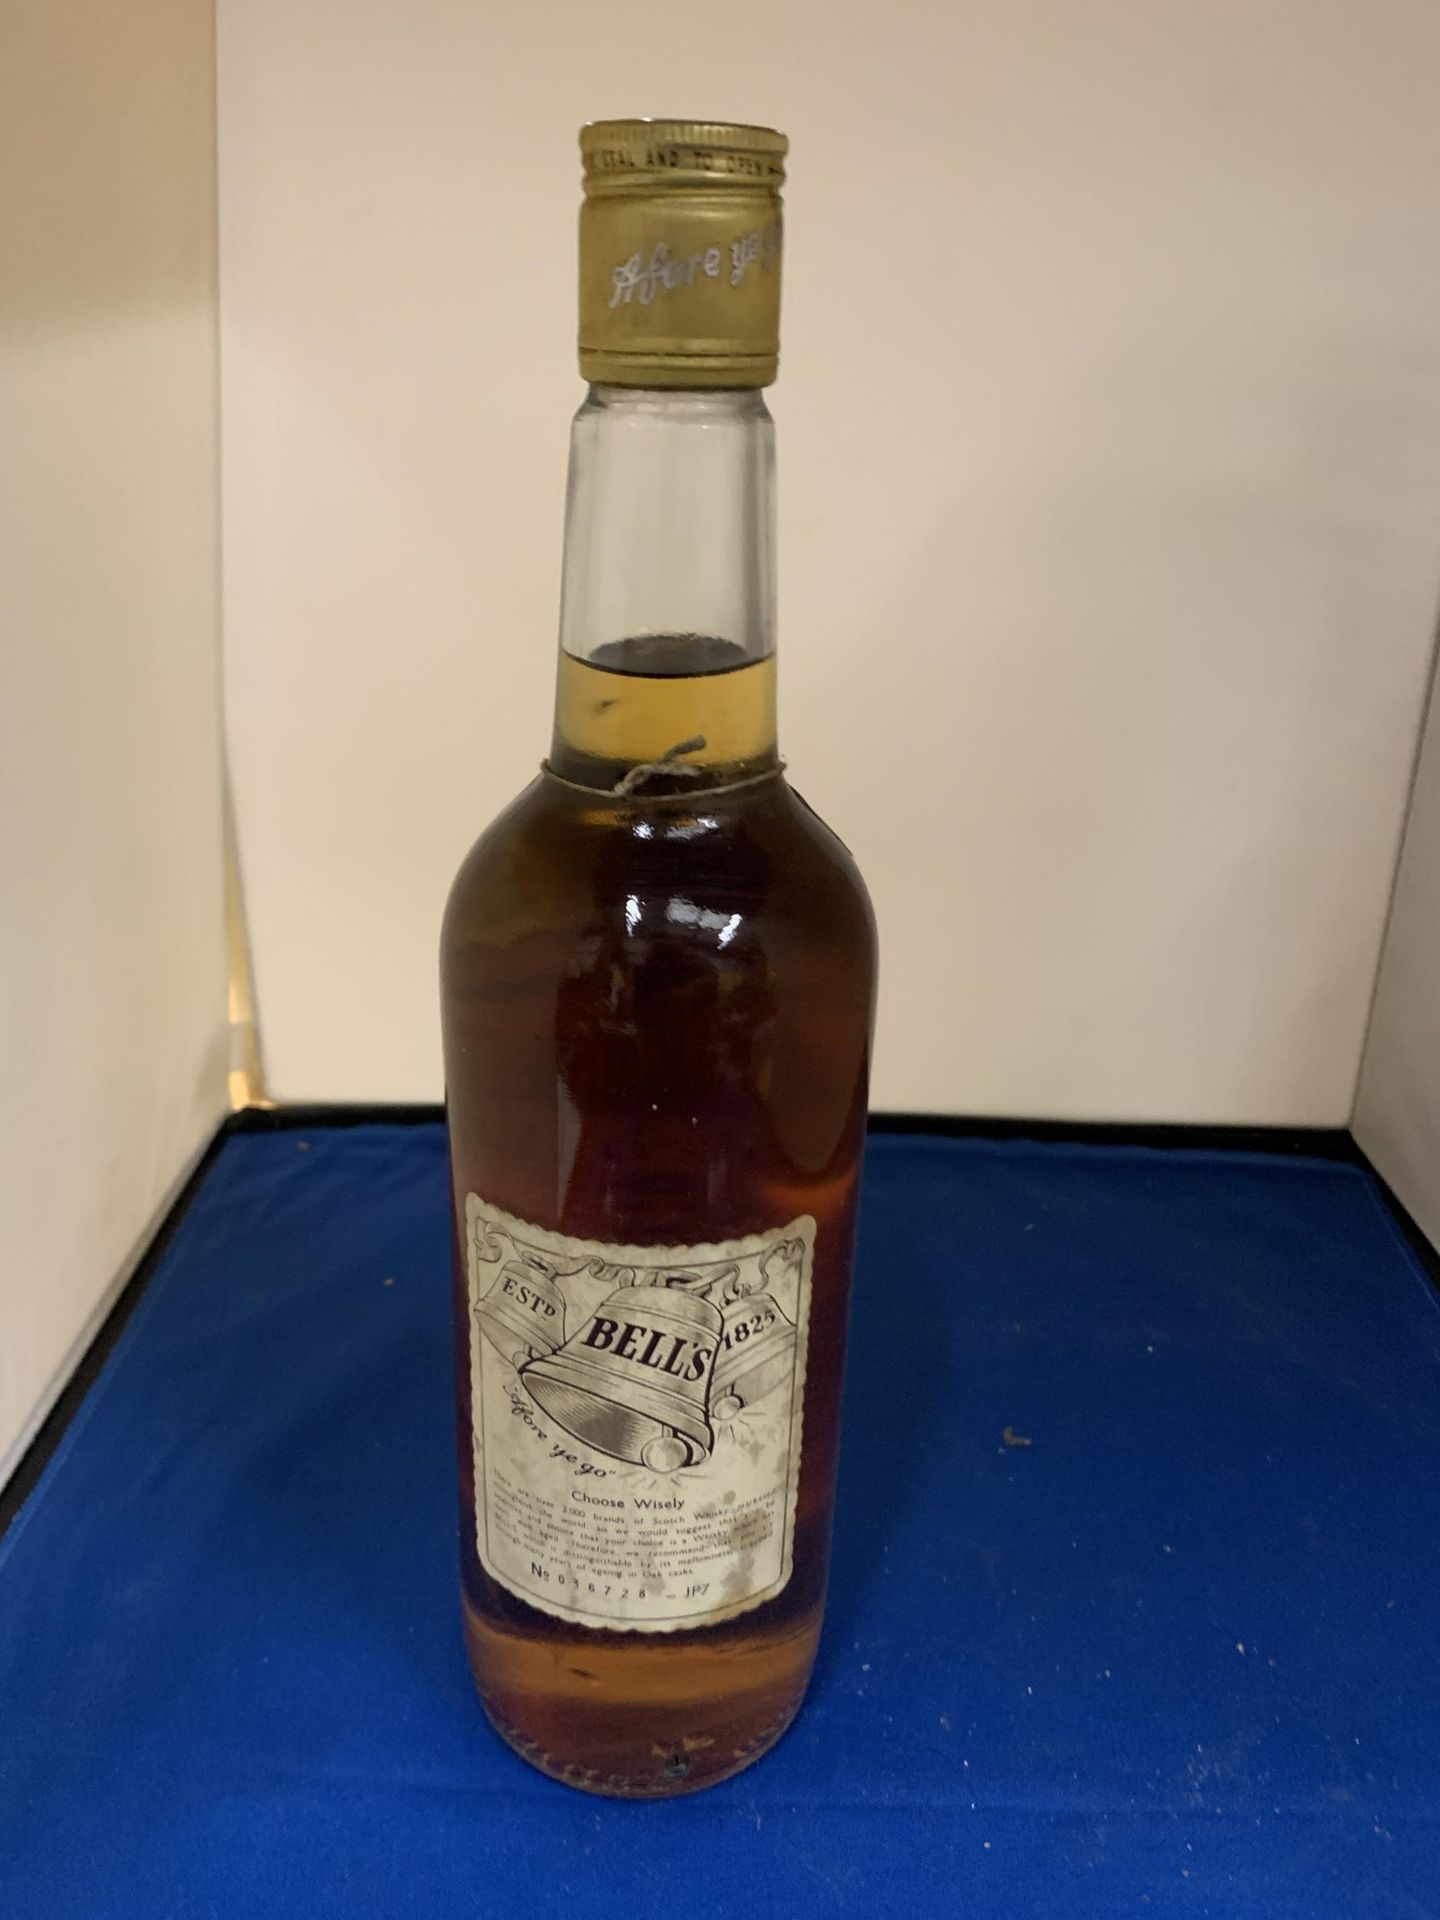 A BOTTLE OF BELLS EXTRA SPECIAL 70% SCOTCH WHISKY - Image 3 of 3